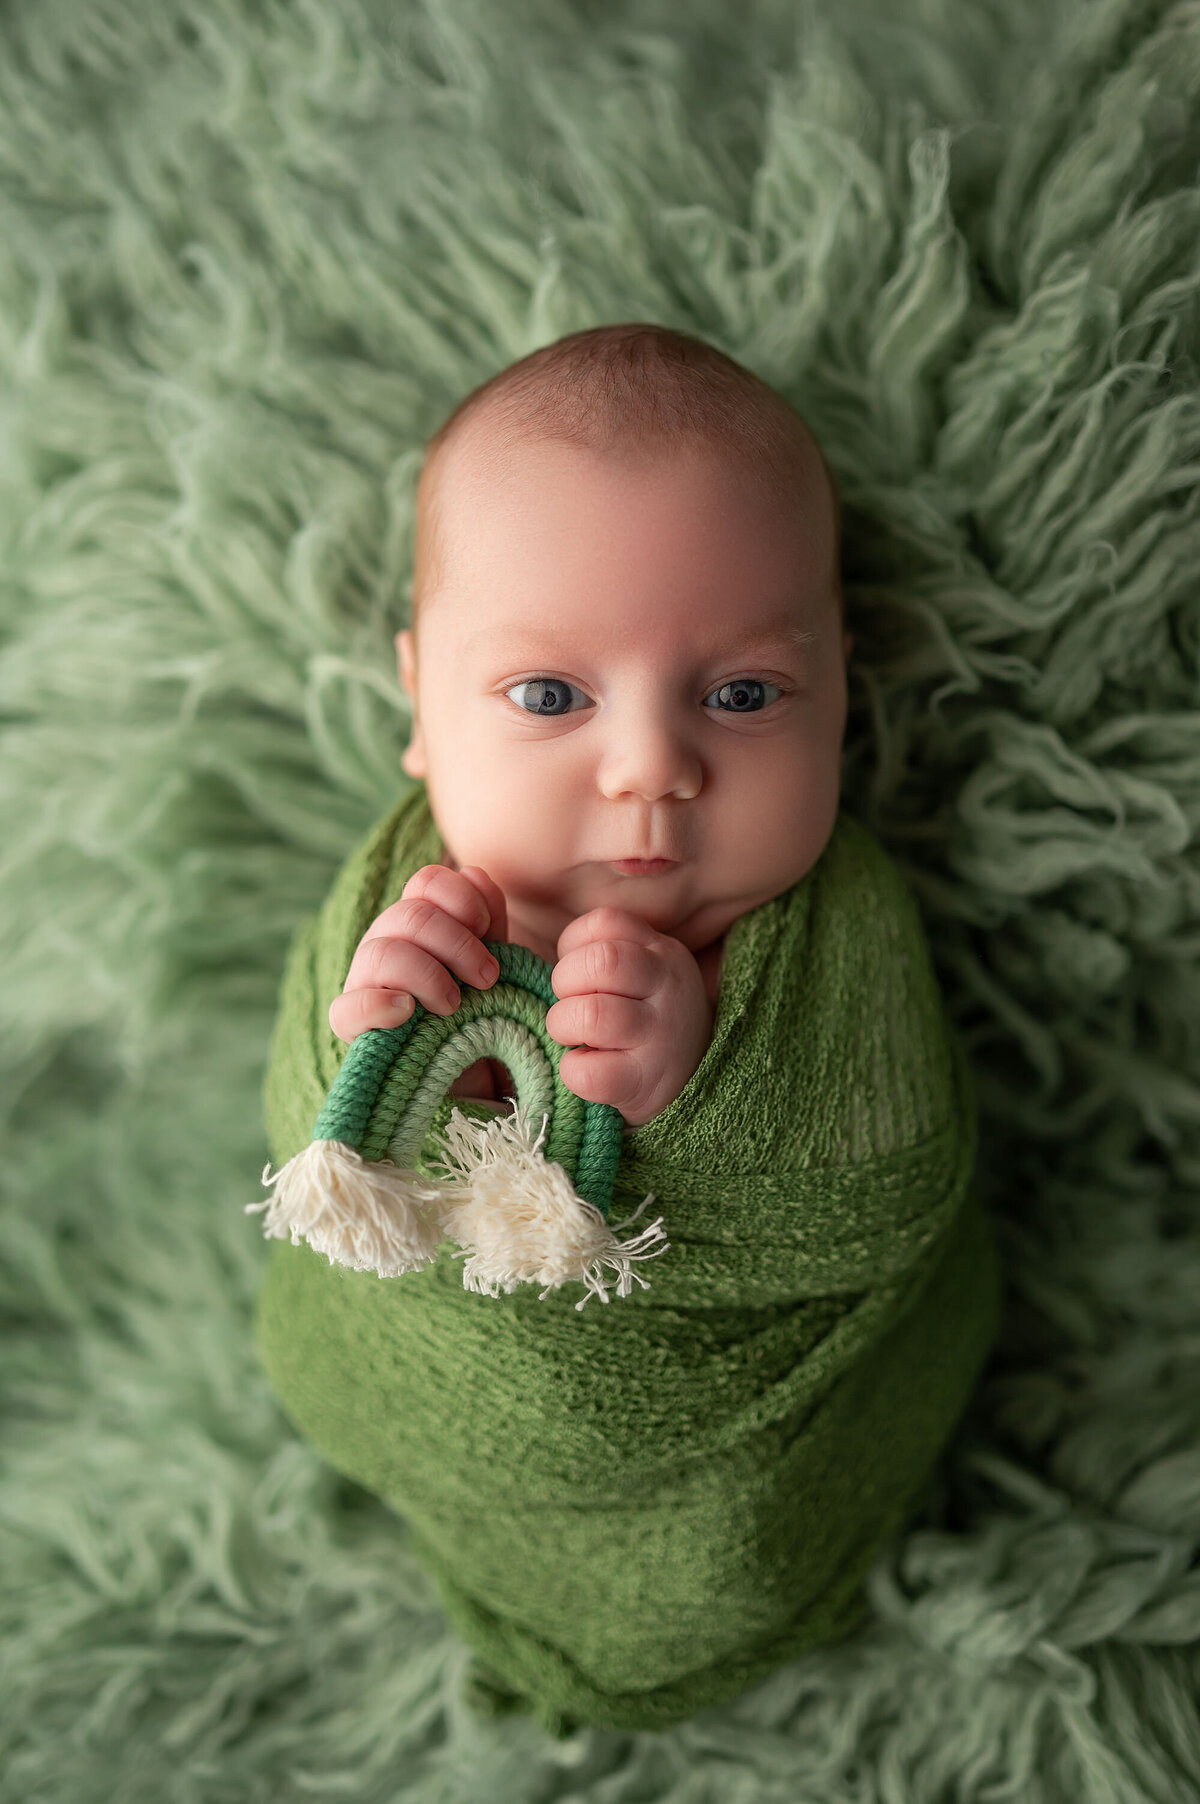 Green-themed newborn portrait taken in our Waukesha photo studio. Baby is wrapped in a green swaddle, placed on a furry green rug holding a green rainbow with eyes wide open.